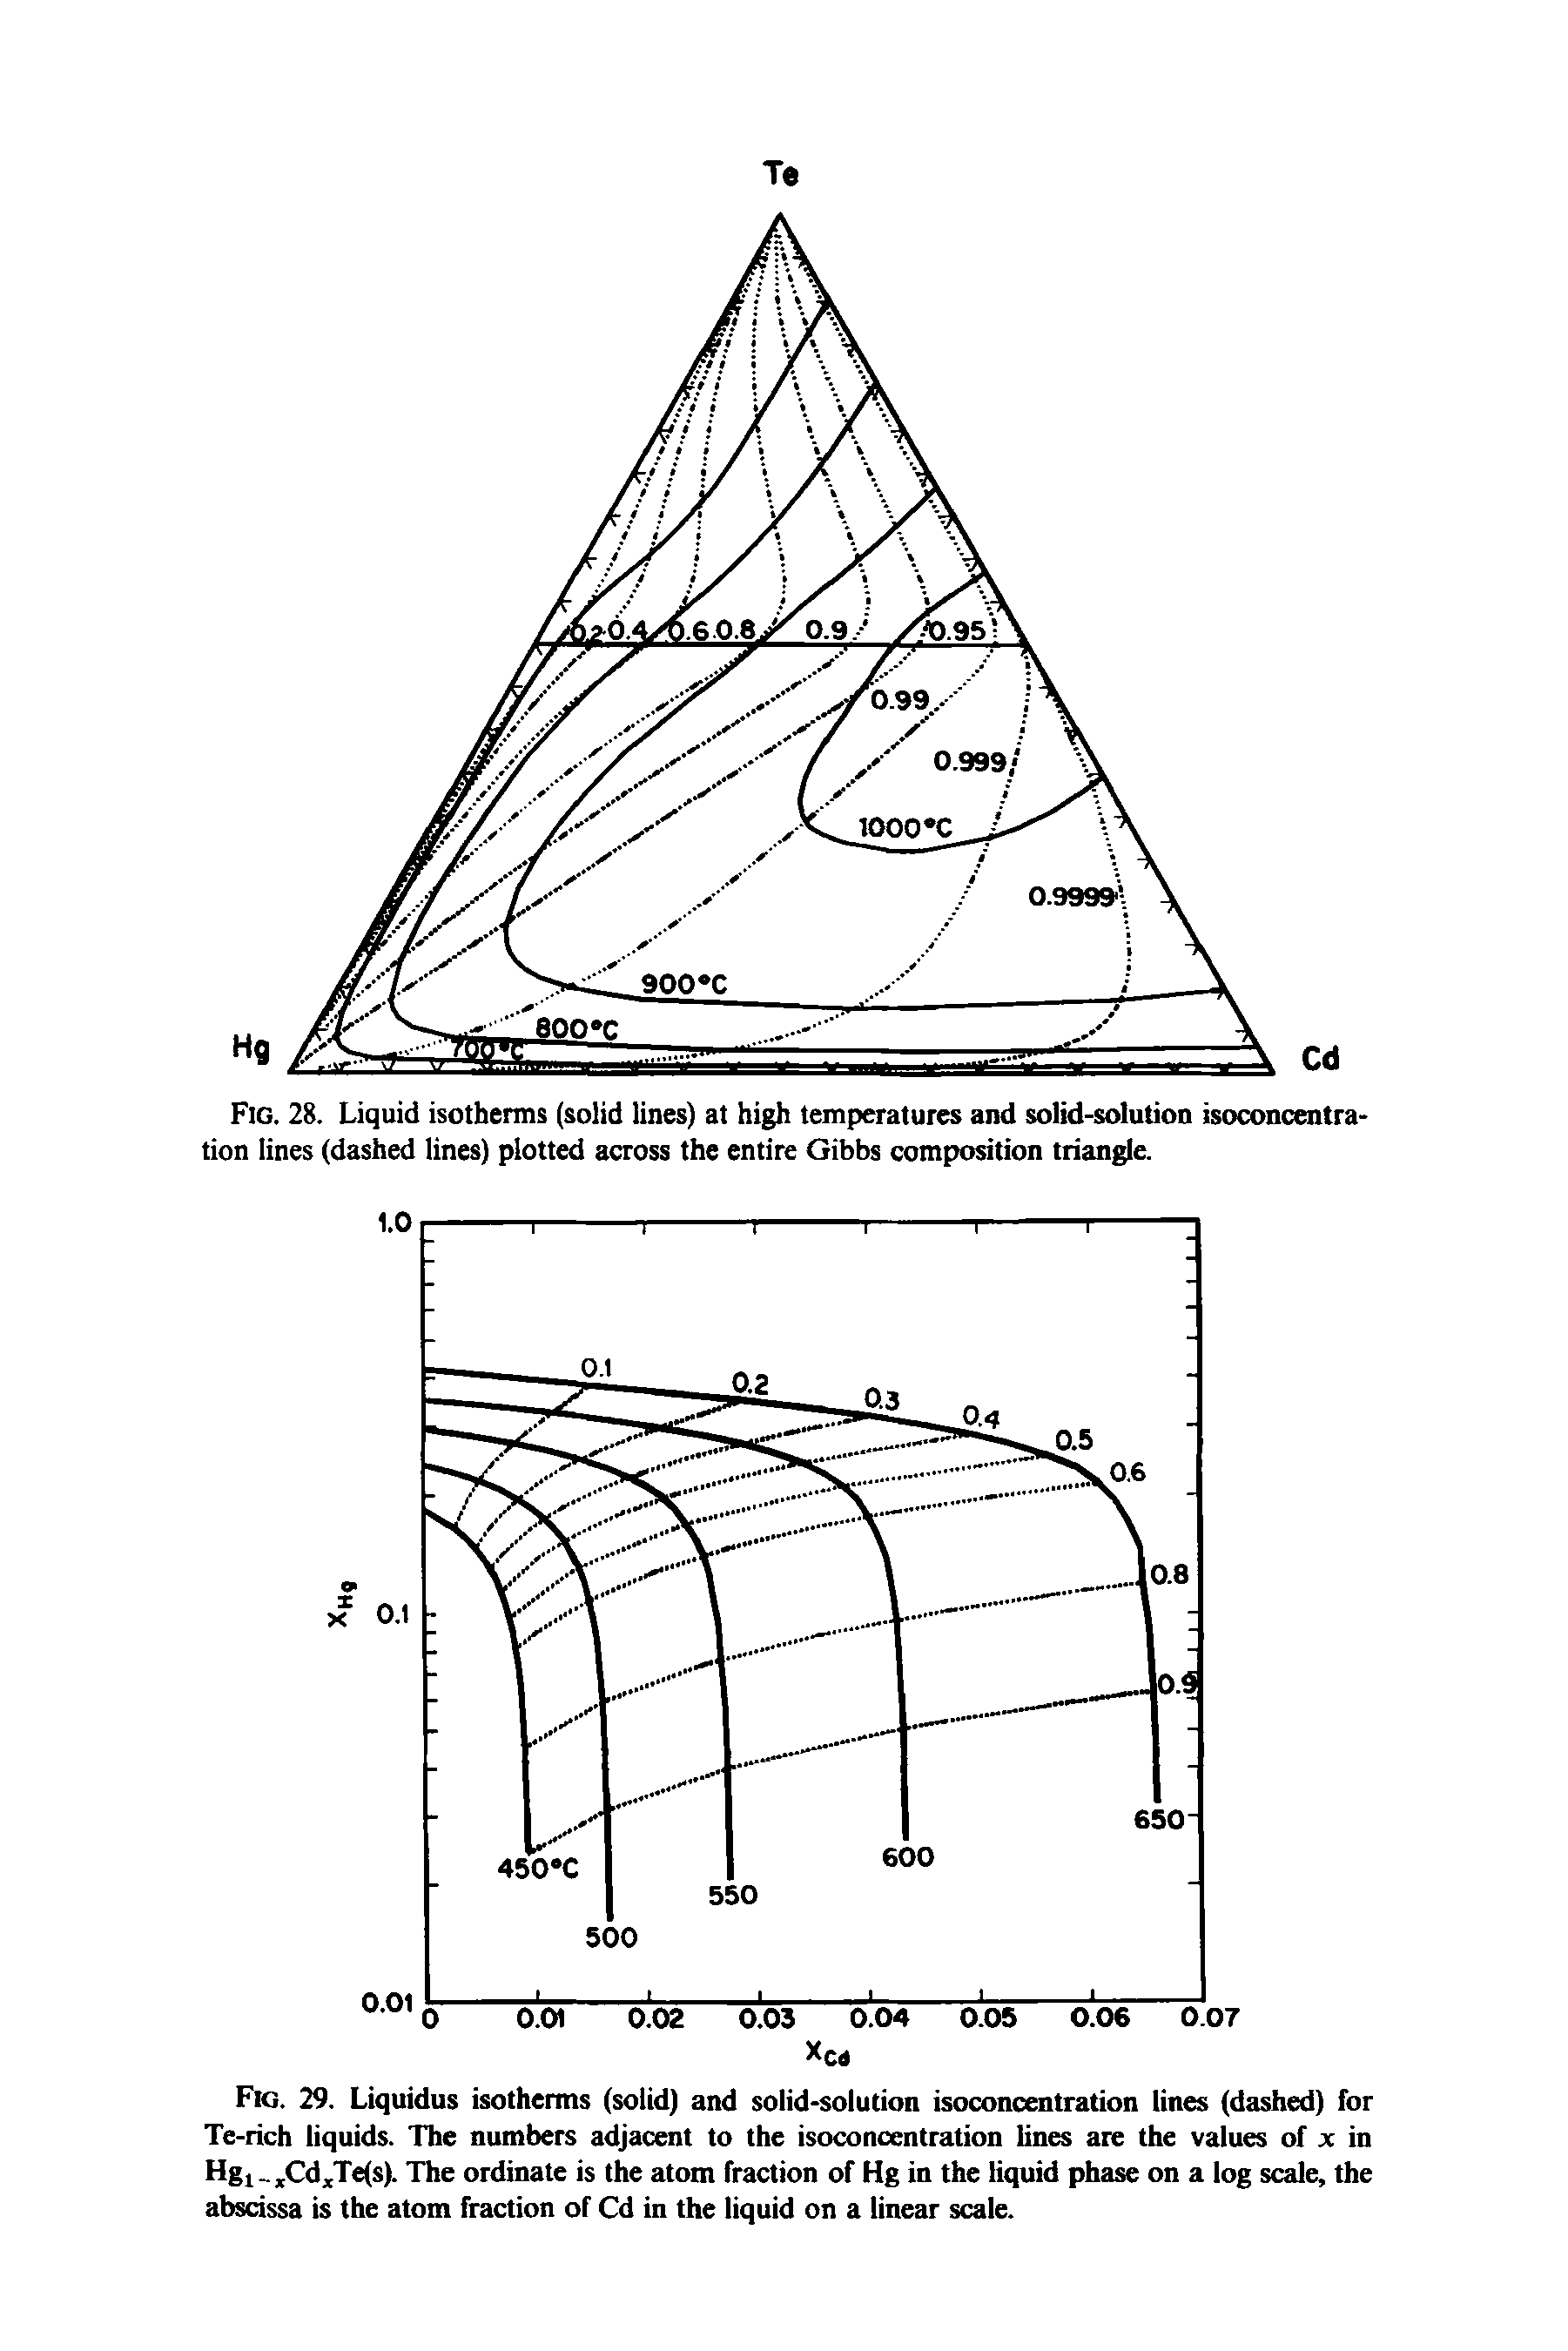 Fig. 28. Liquid isotherms (solid lines) at high temperatures and solid-solution isoconcentration lines (dashed lines) plotted across the entire Gibbs composition triangle.